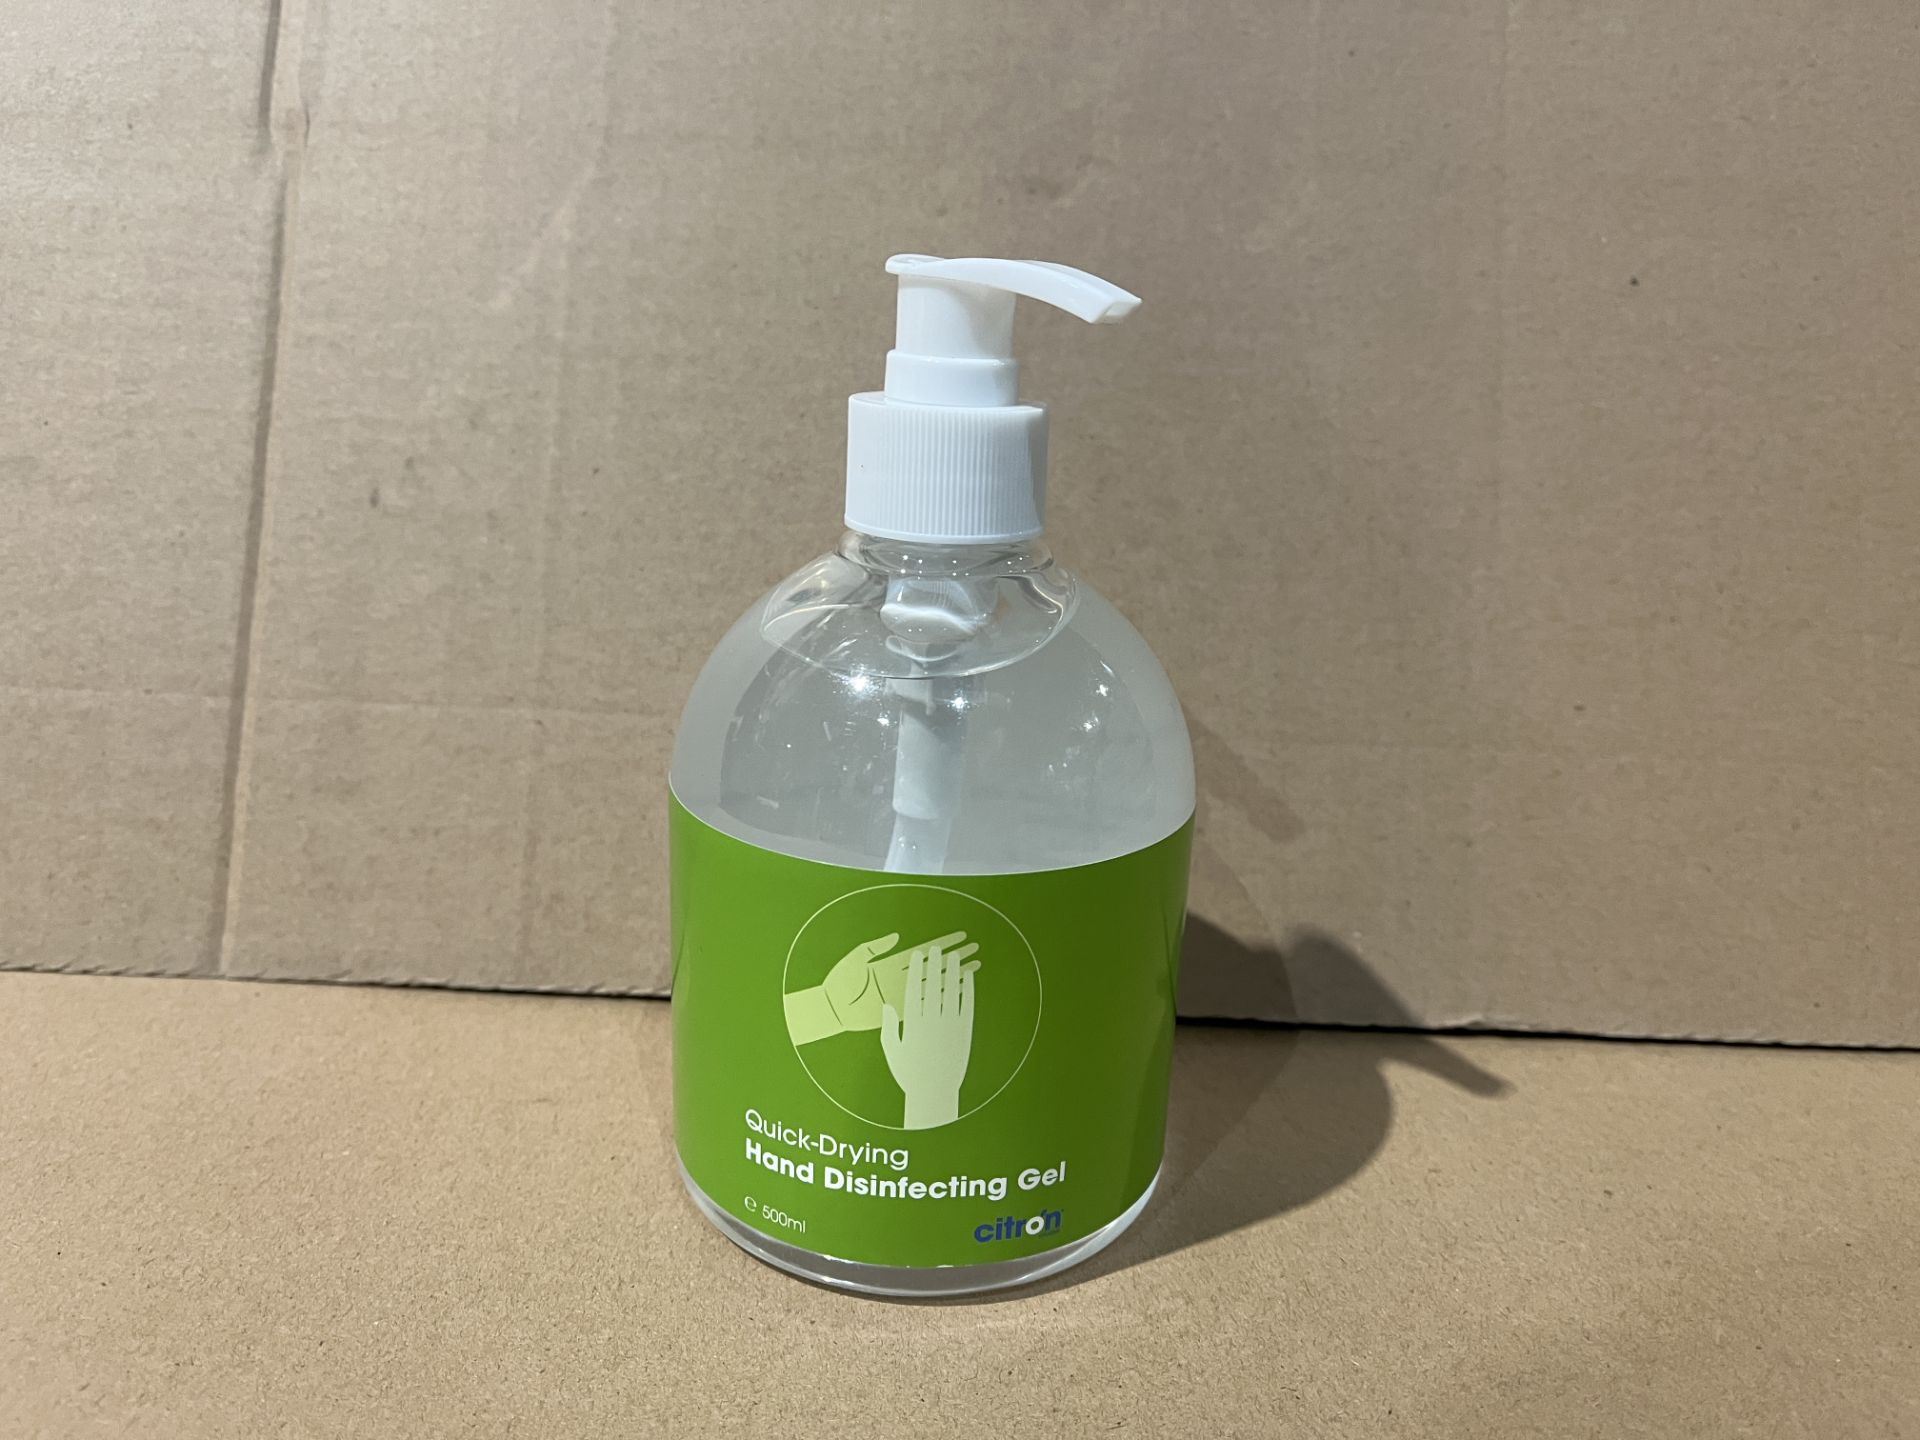 144 X BRAND NEW CITRON 500ML QUICK DRYING HAND DISINFECTANT GEL R13-8